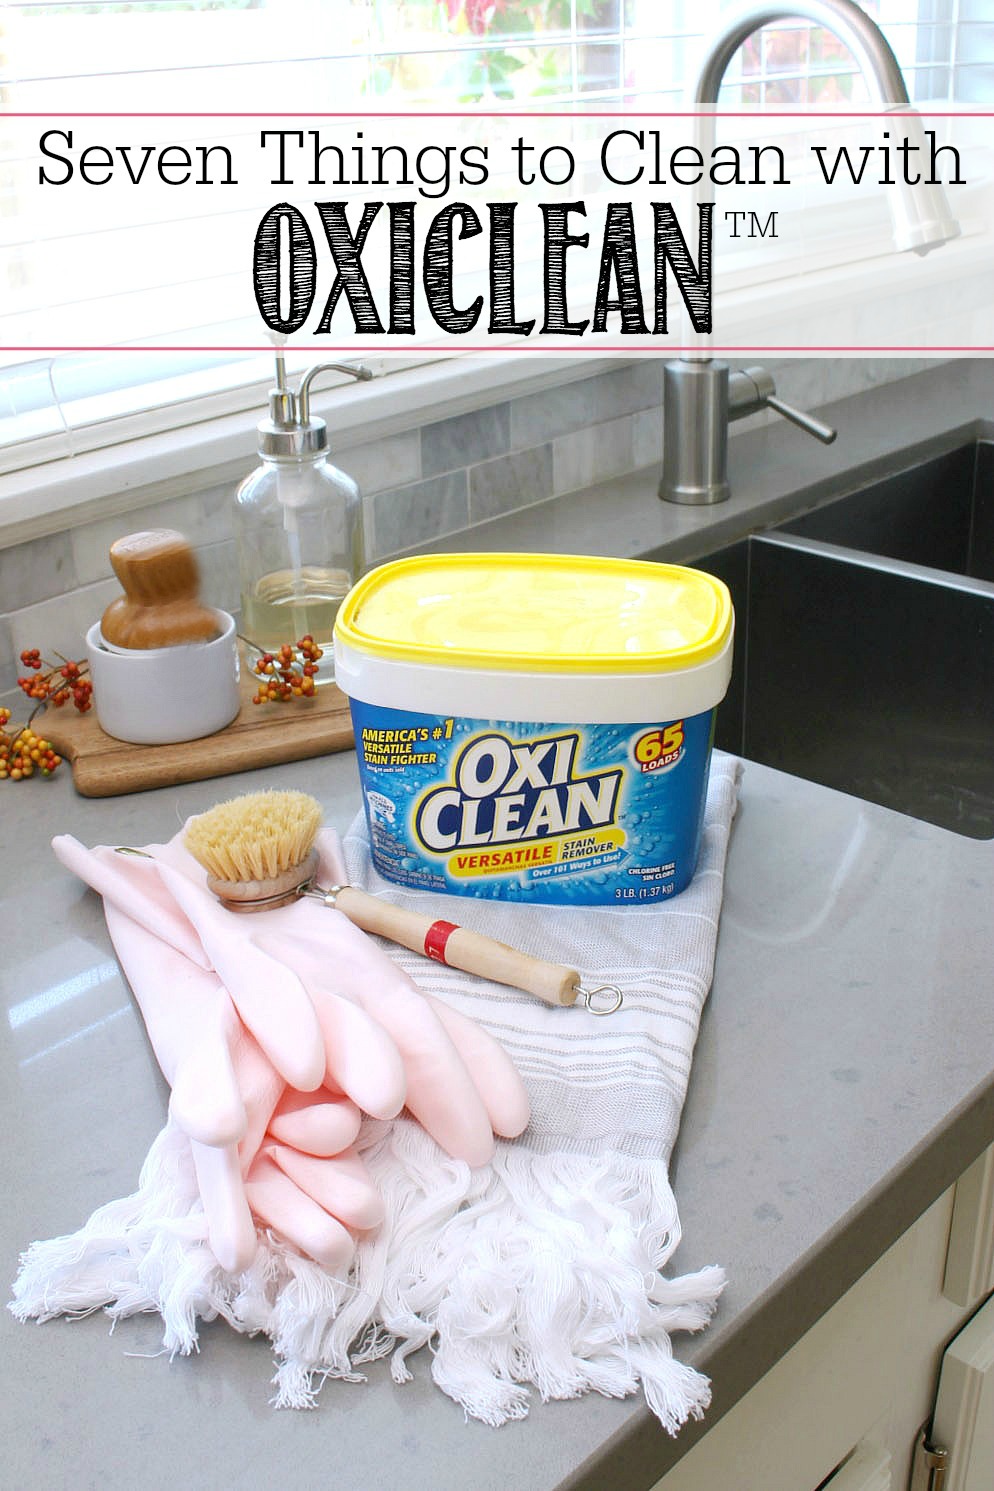 7 things that you can clean with Oxiclean. I love it when one cleaner can be used for so many different cleaning tasks. #sponsored